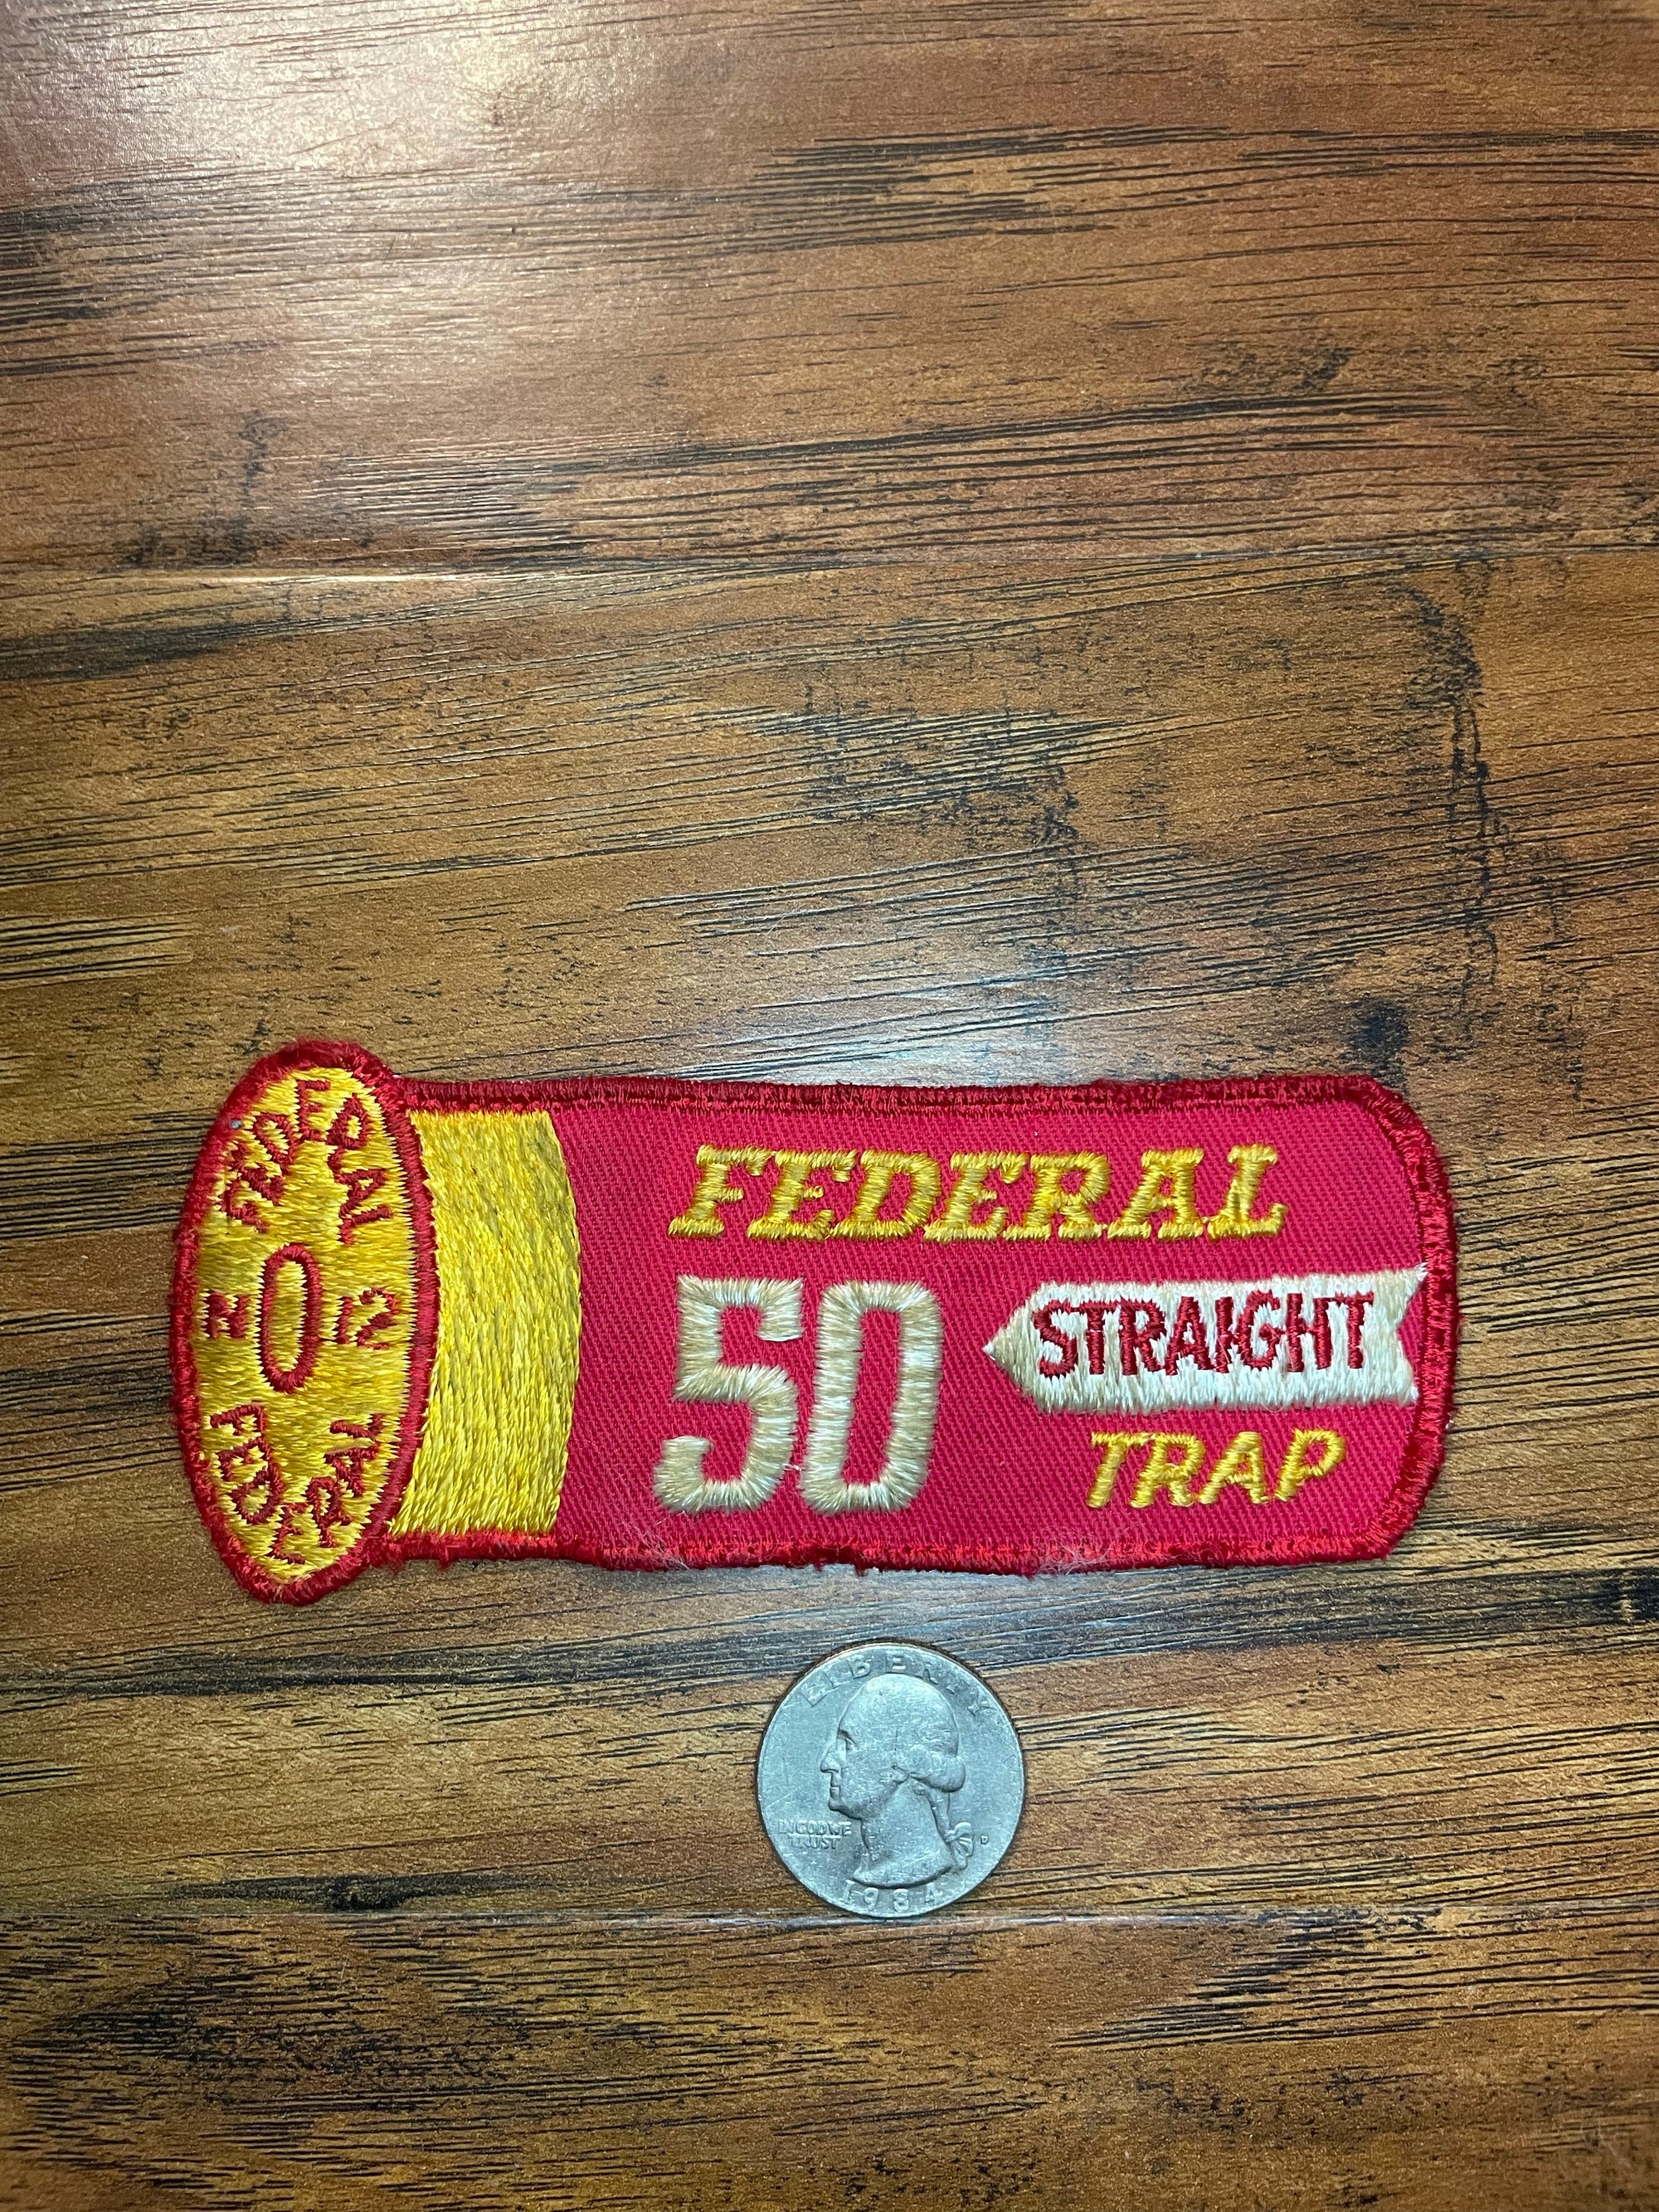 Vintage Federal 50 Straight Trap